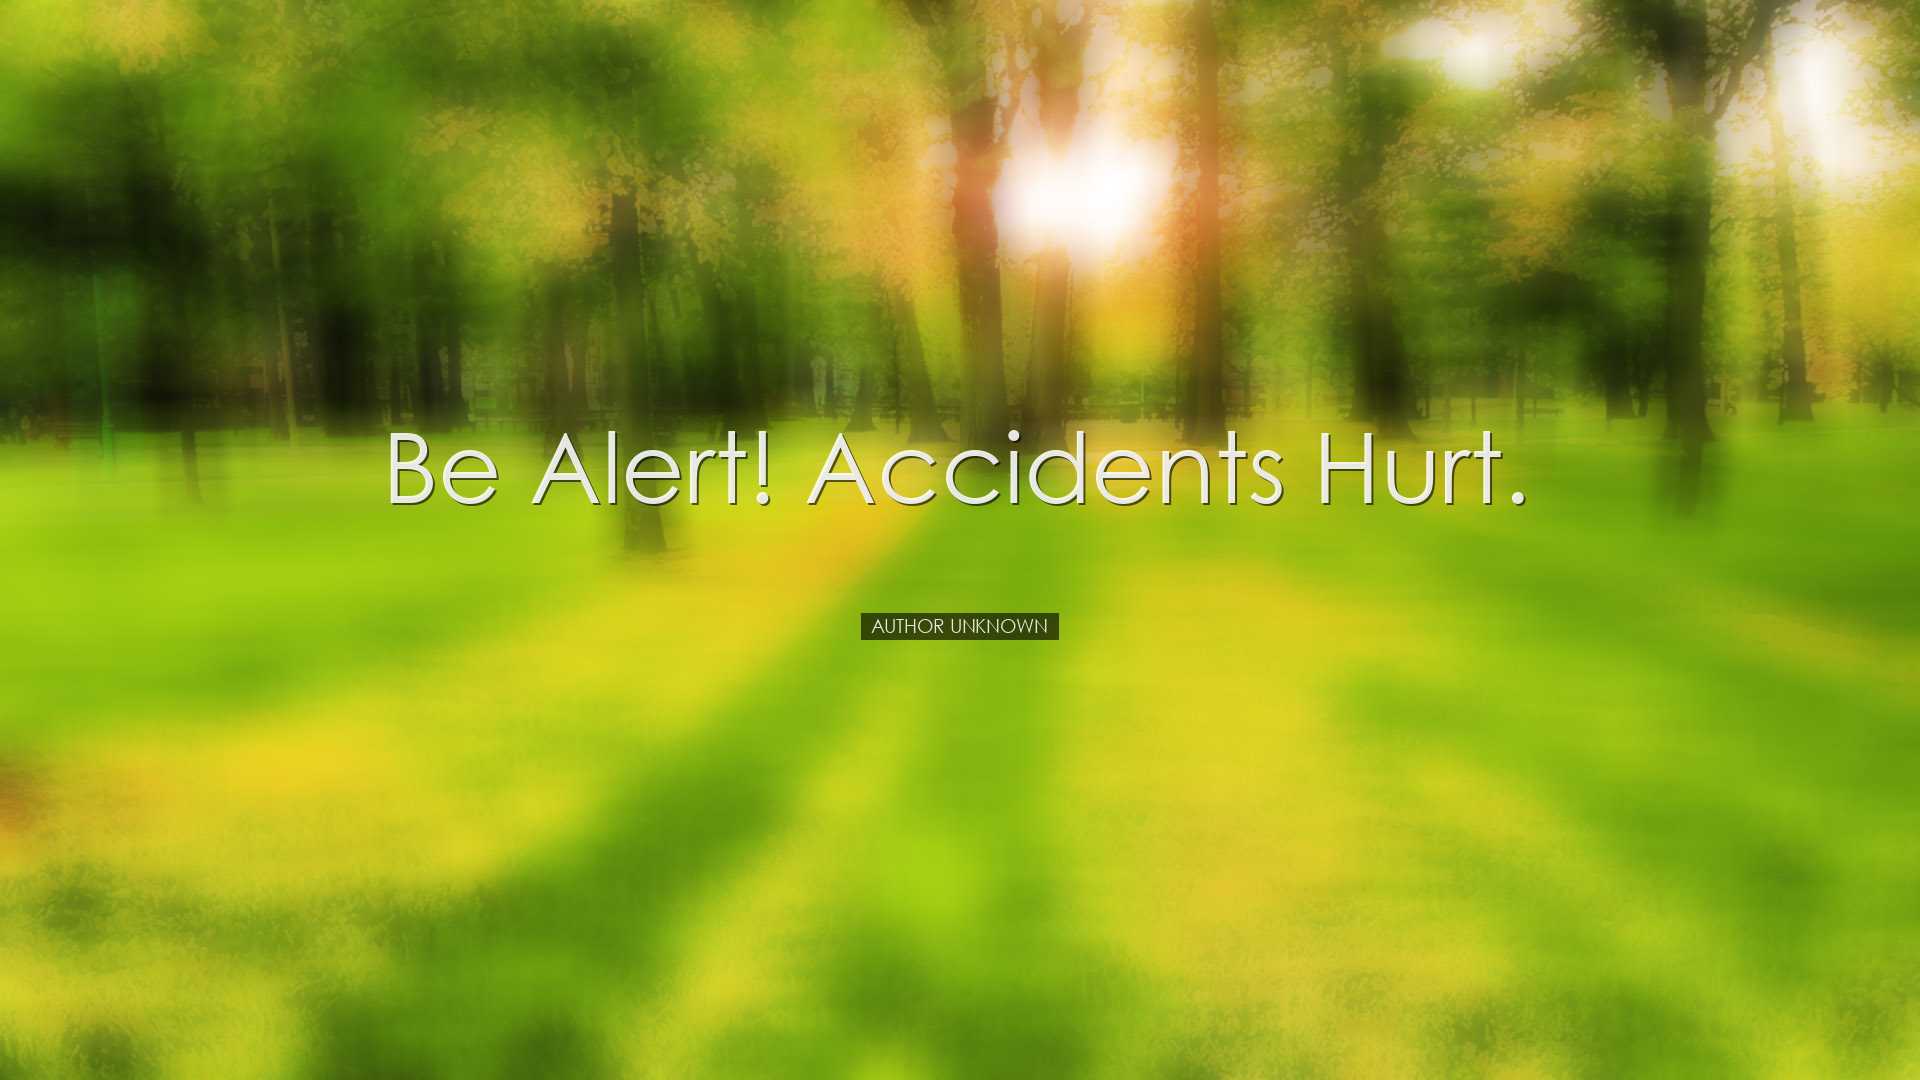 Be alert! Accidents hurt. - Author unknown